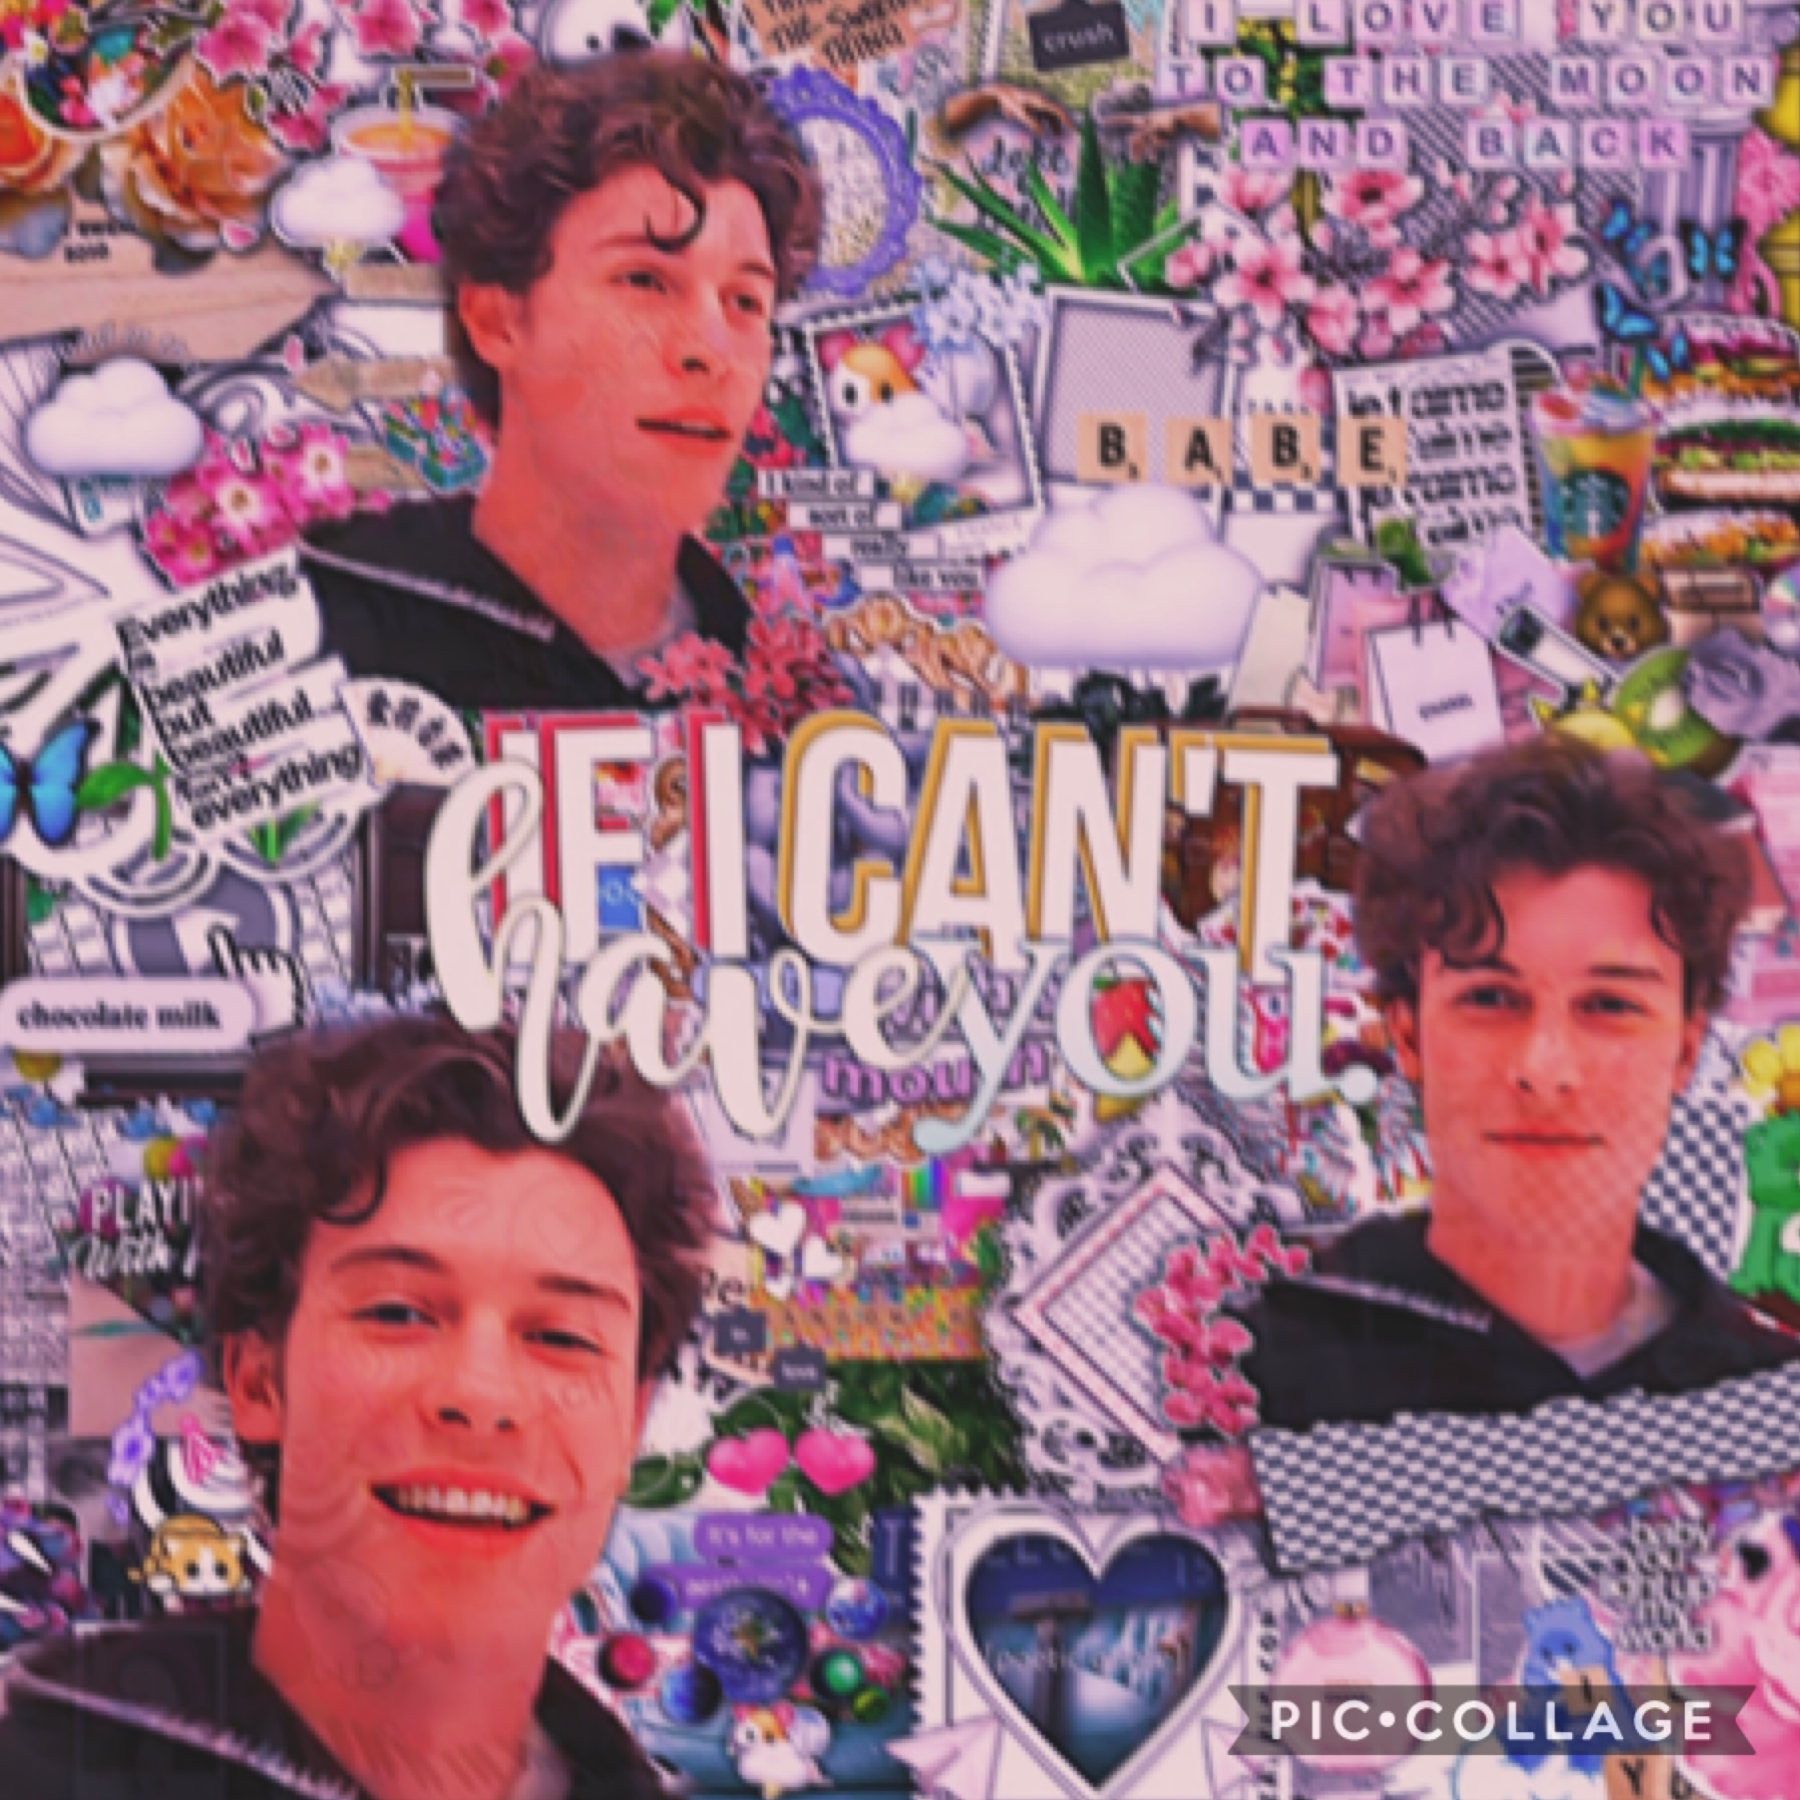 t a p - - > 

e d i t   d e t a i l s 🌸
celeb : shawn mendes 
type of edit : complex
thoughts : kinda like this but could be better 


m e   d e t a i l s  💀
location : my house while eating chips 
time : 7:12 pm
mood : 😎
weather : ❄️

———————————————————